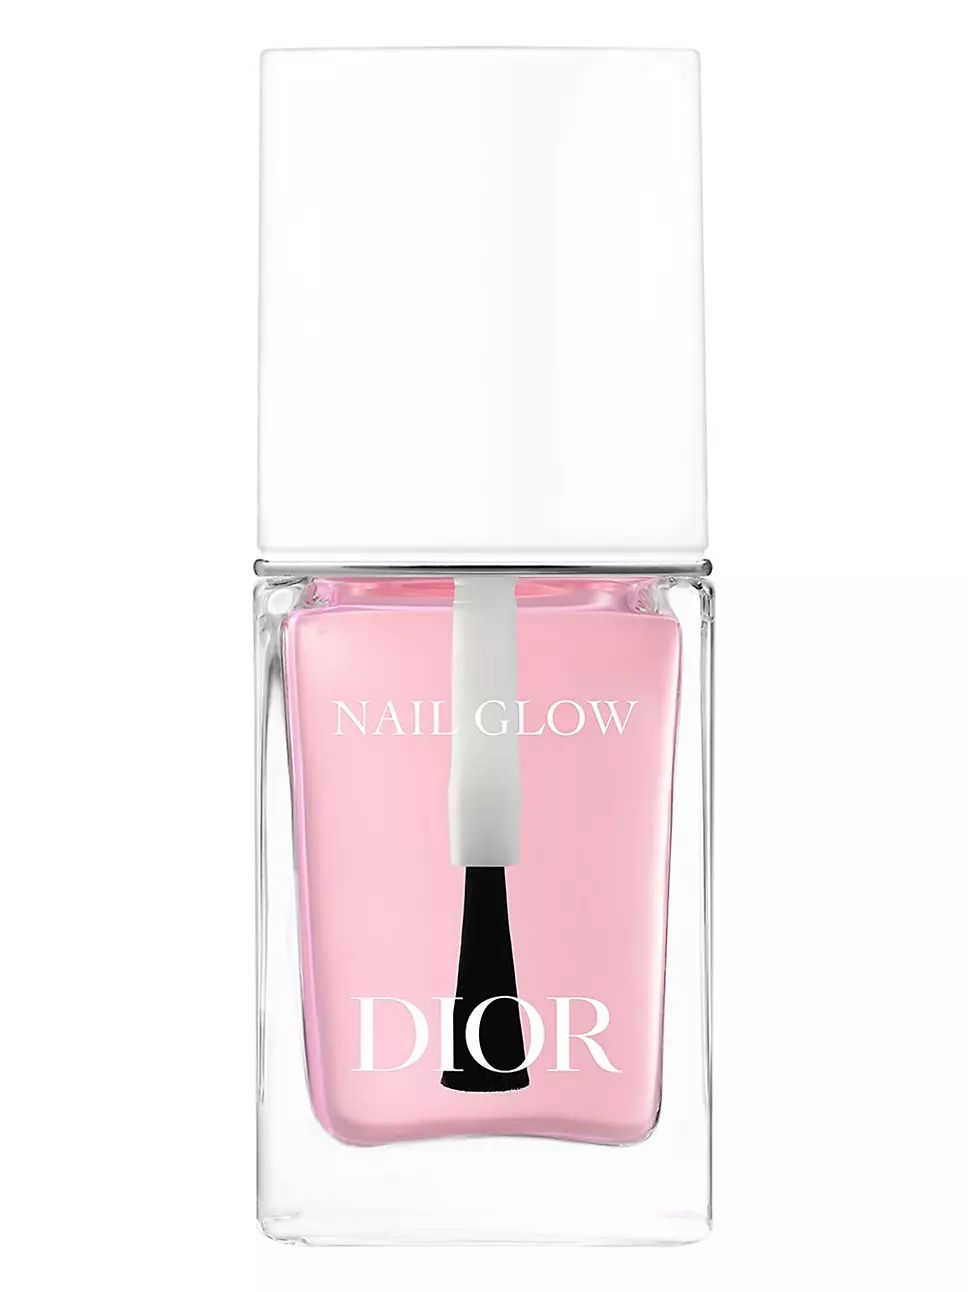 Dior Nail Glow Beautifying Nail Care - Instant French Manicure Effect | Saks Fifth Avenue